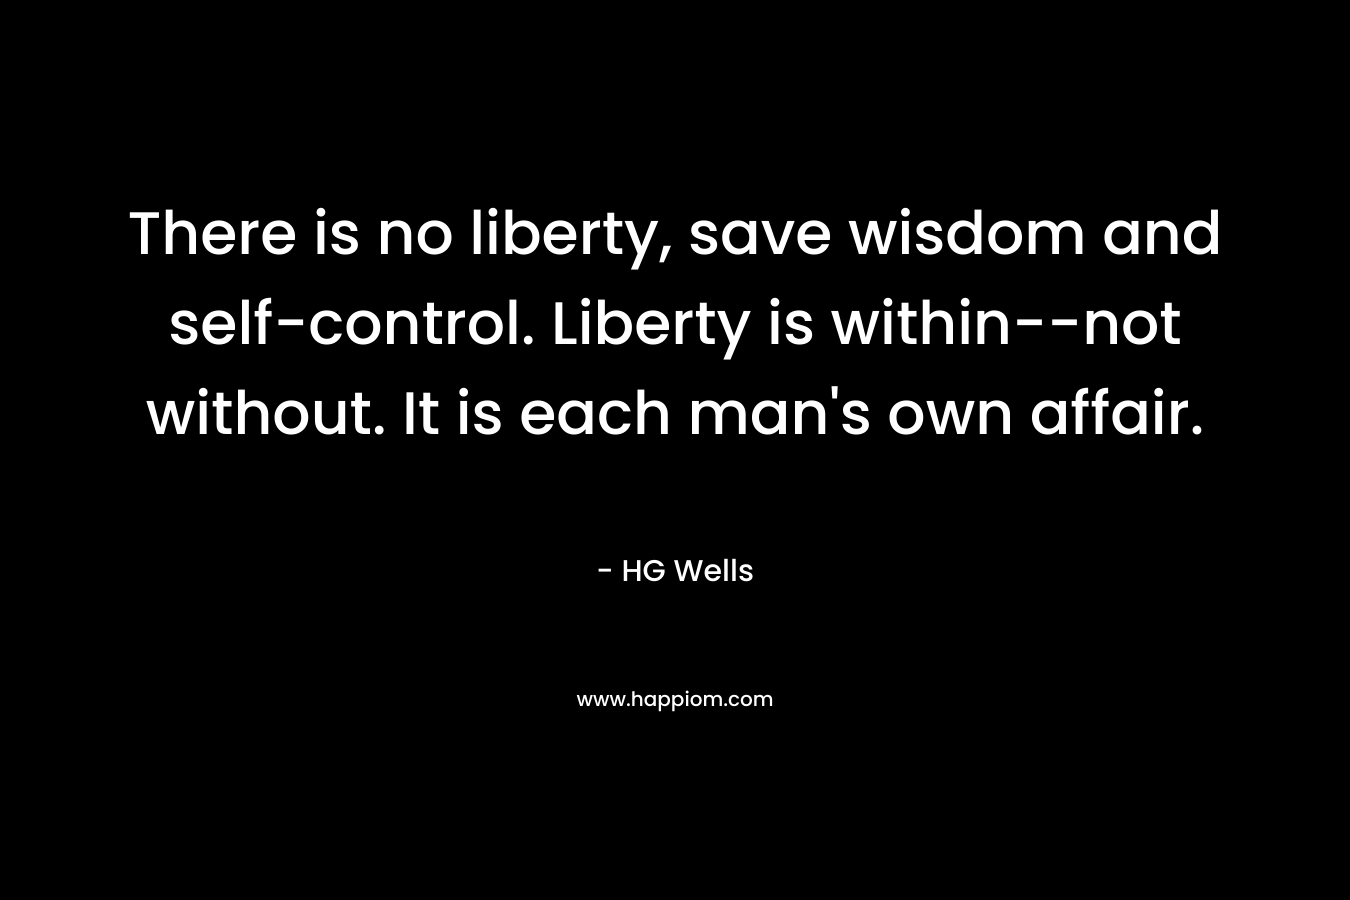 There is no liberty, save wisdom and self-control. Liberty is within--not without. It is each man's own affair.